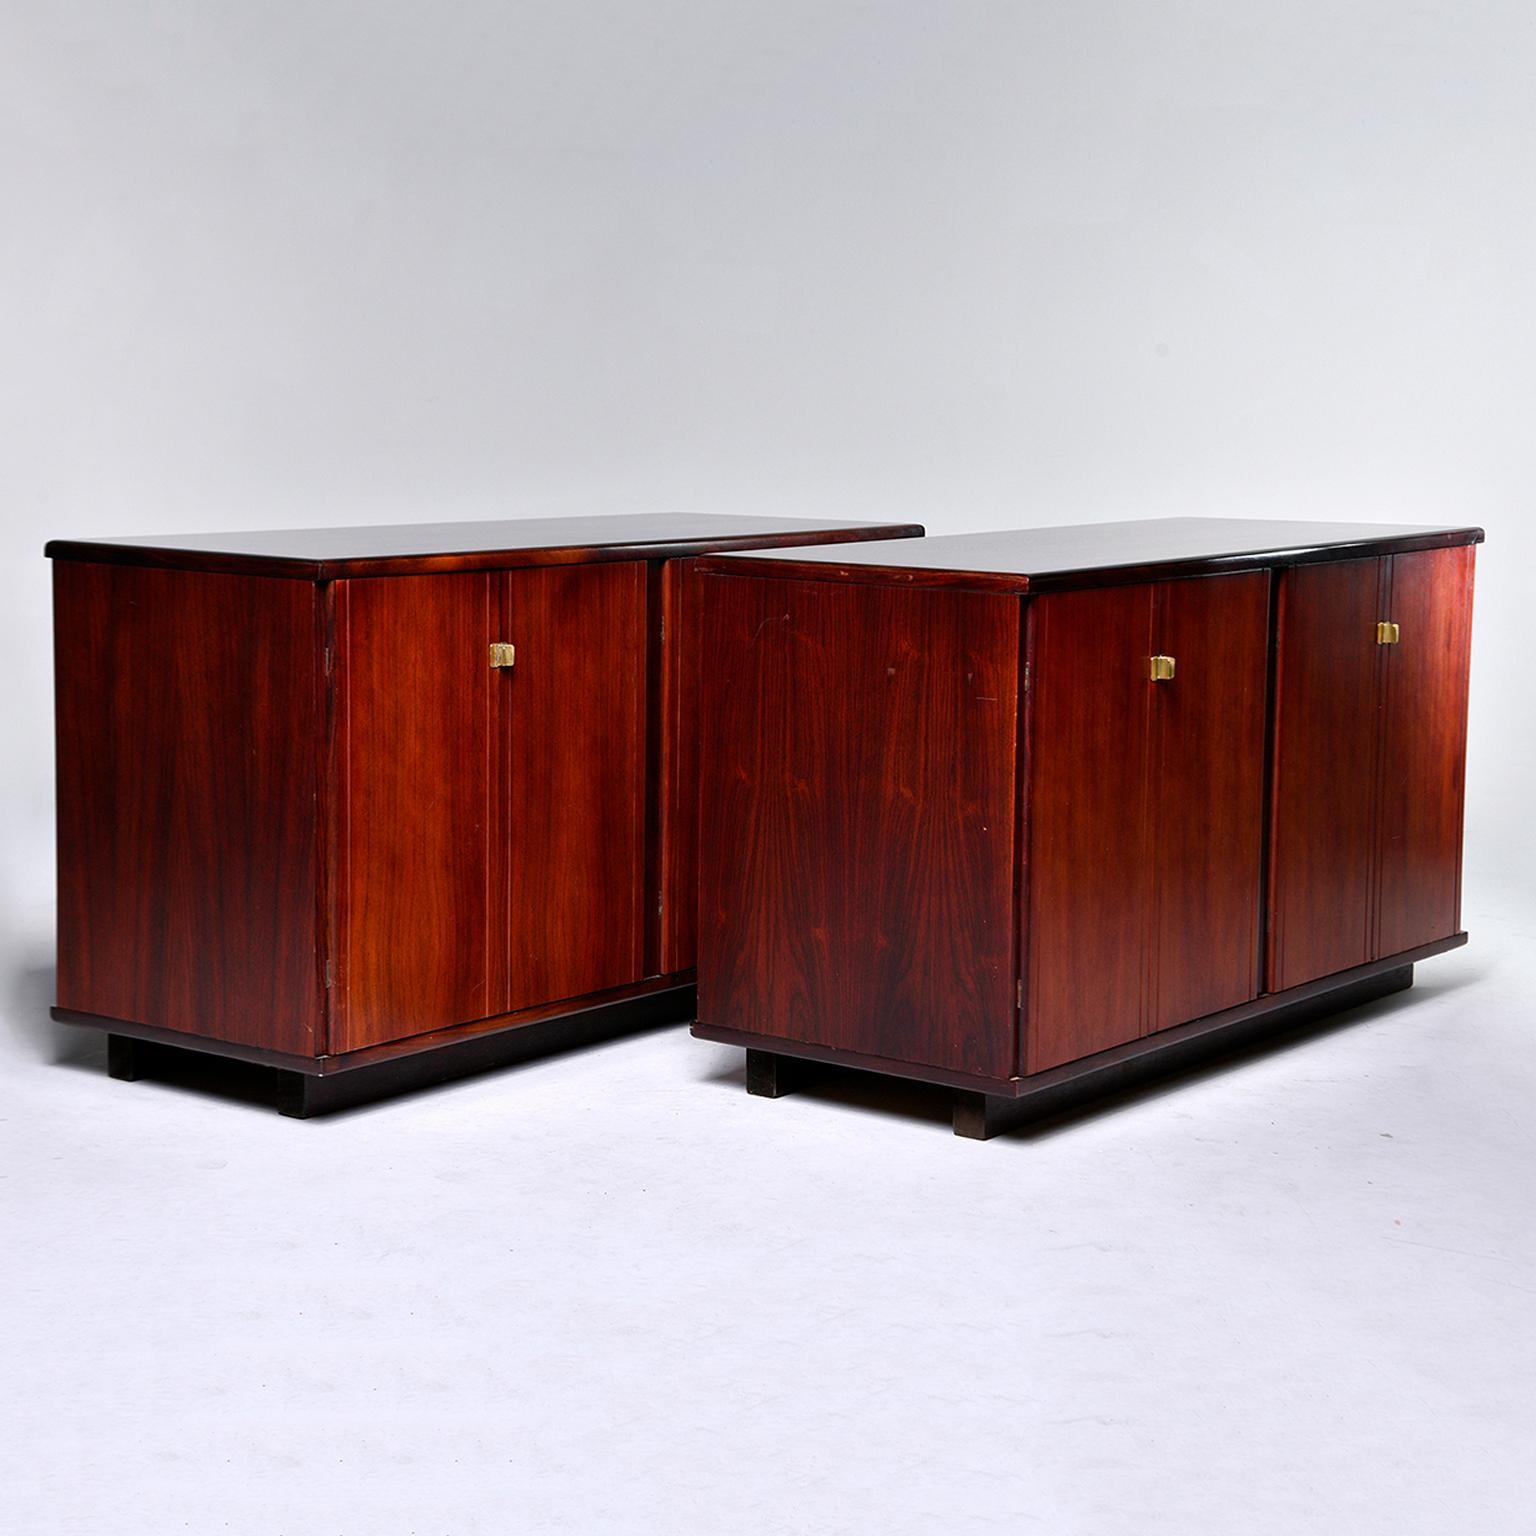 Pair of circa 1960s Italian rosewood cabinets. Each cabinet features two storage compartments with a single interior shelf and hinged doors with streamlined brass hardware. Unknown maker. Sold and priced as a pair.
 